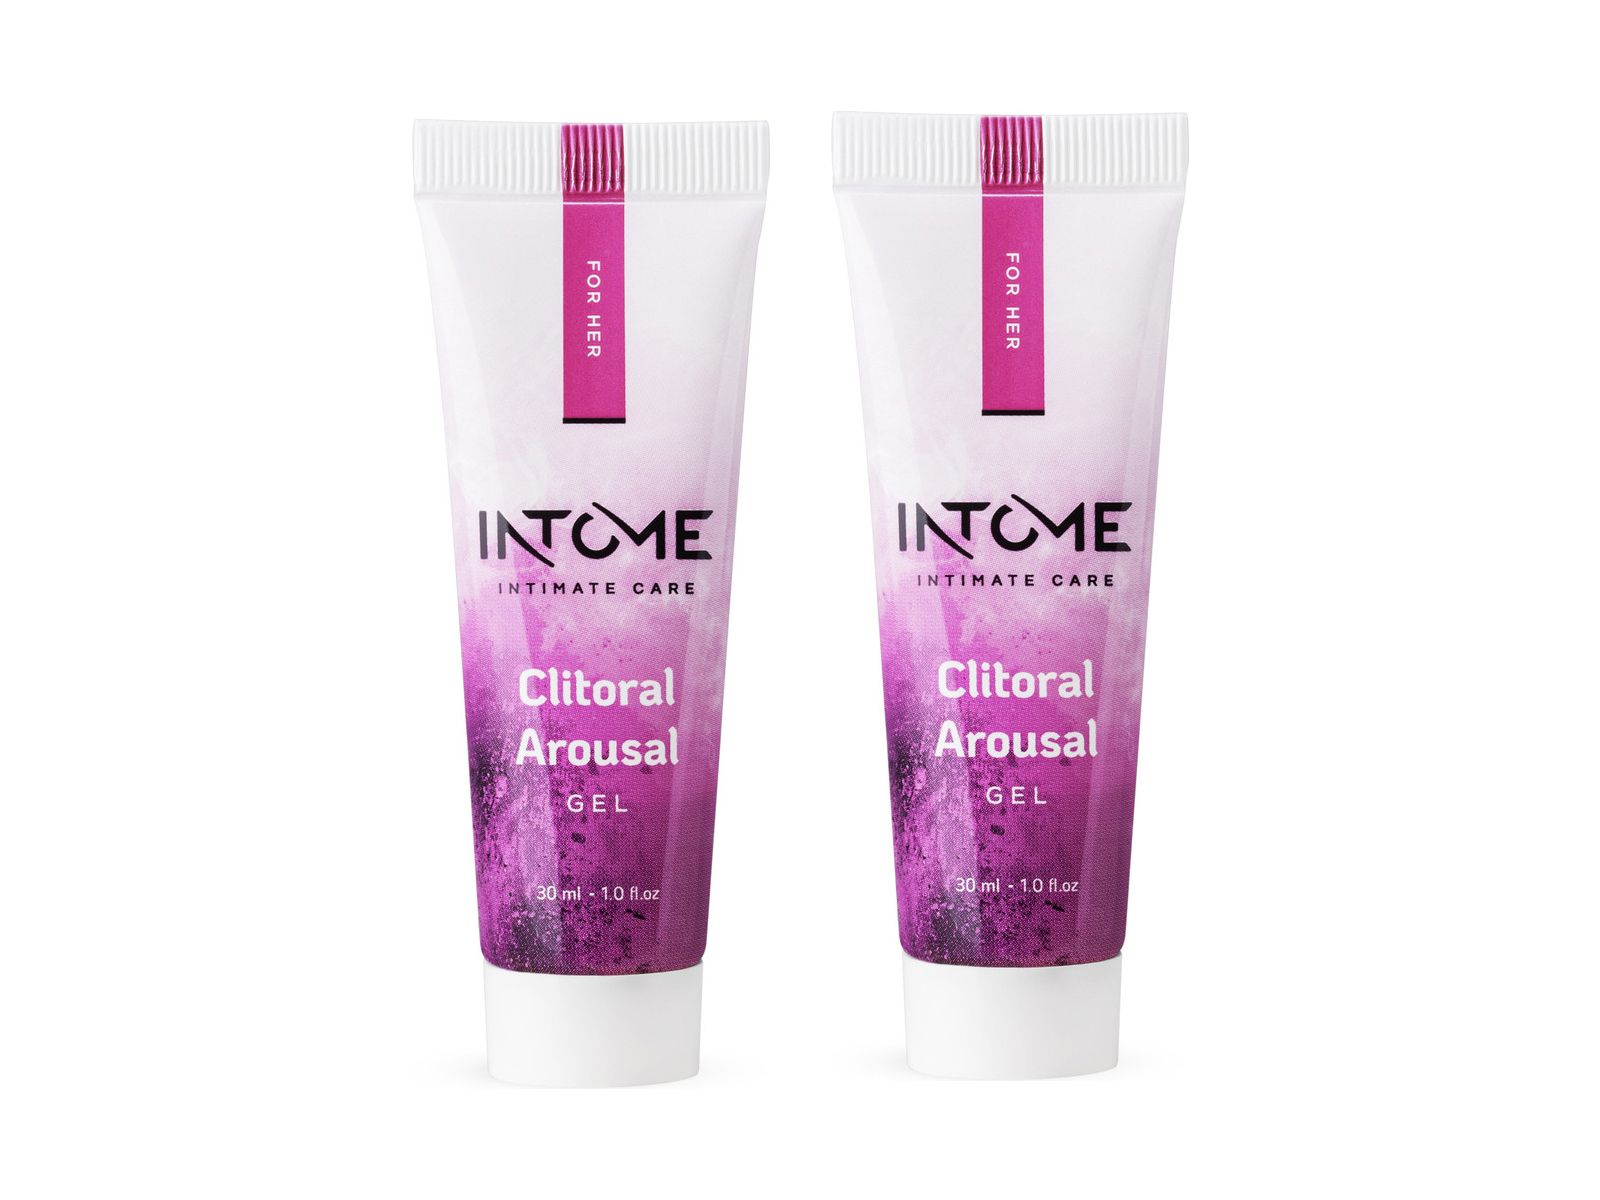 2x-intome-clitoral-arousal-gel-30-ml